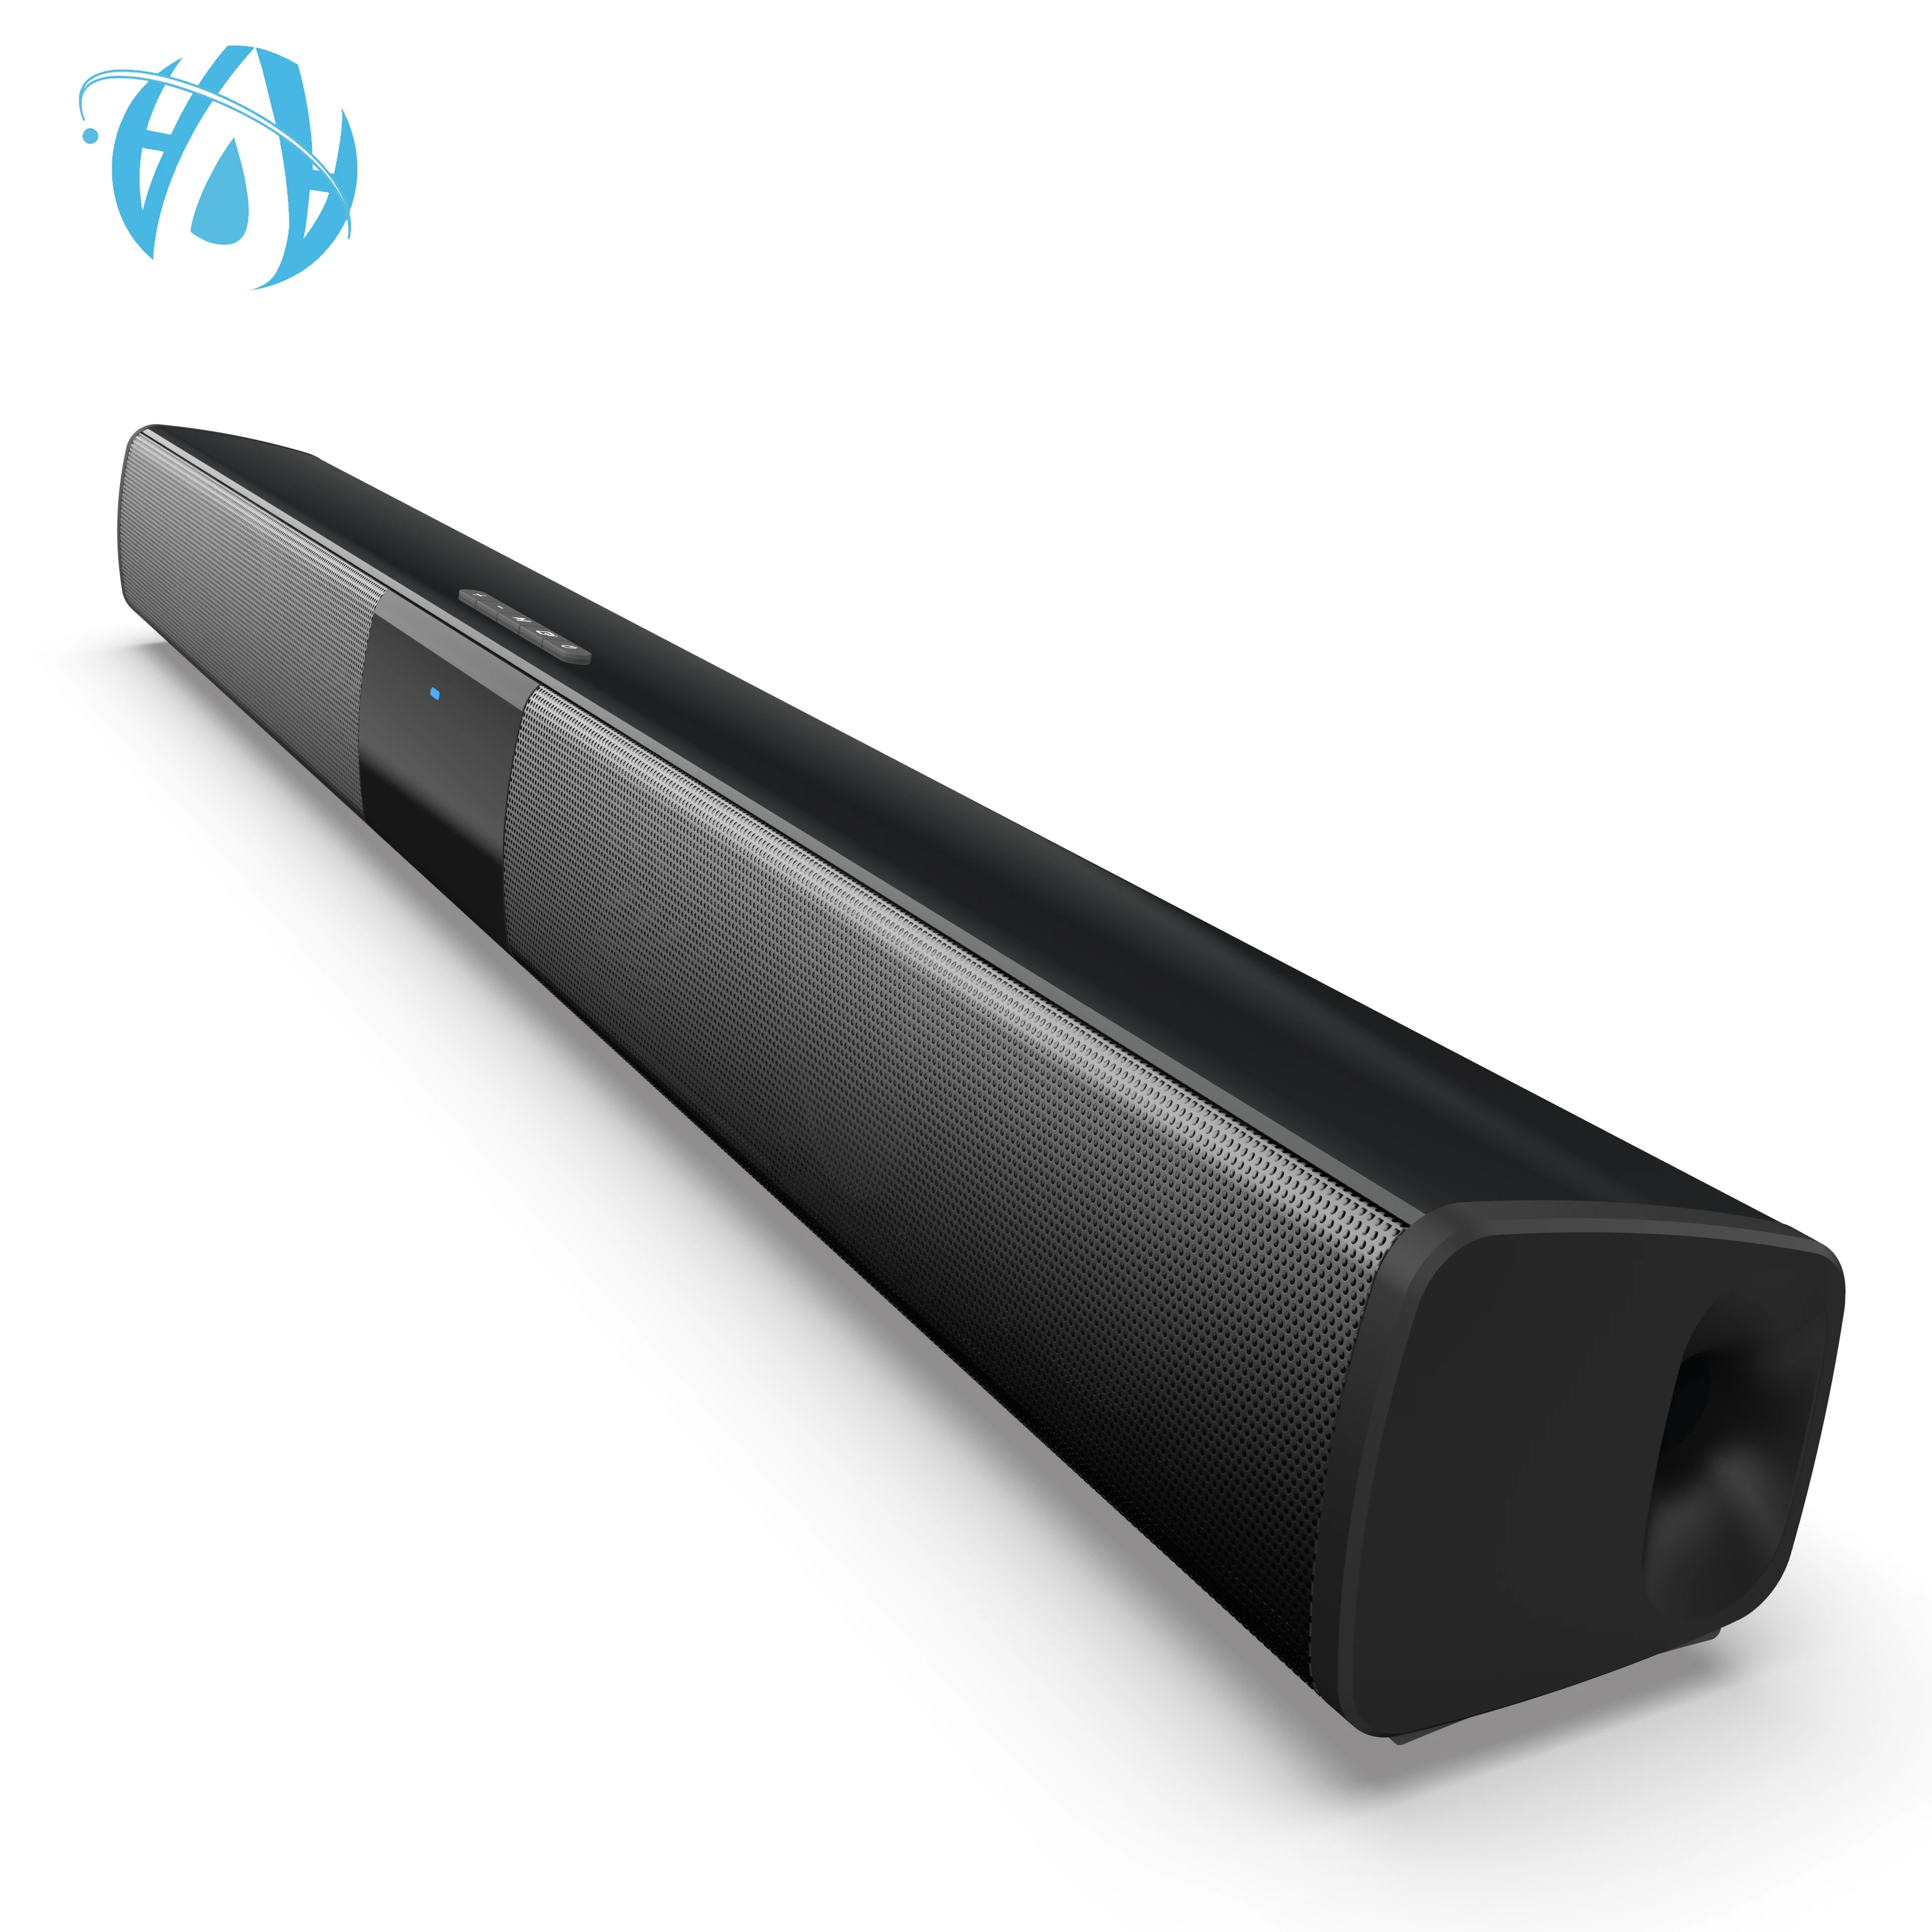 

21inch 4 Speakers Wired and Wireless Bluetooth soundbar 3D Surround Speaker Home Theater Sound Bar Audio tower speakers